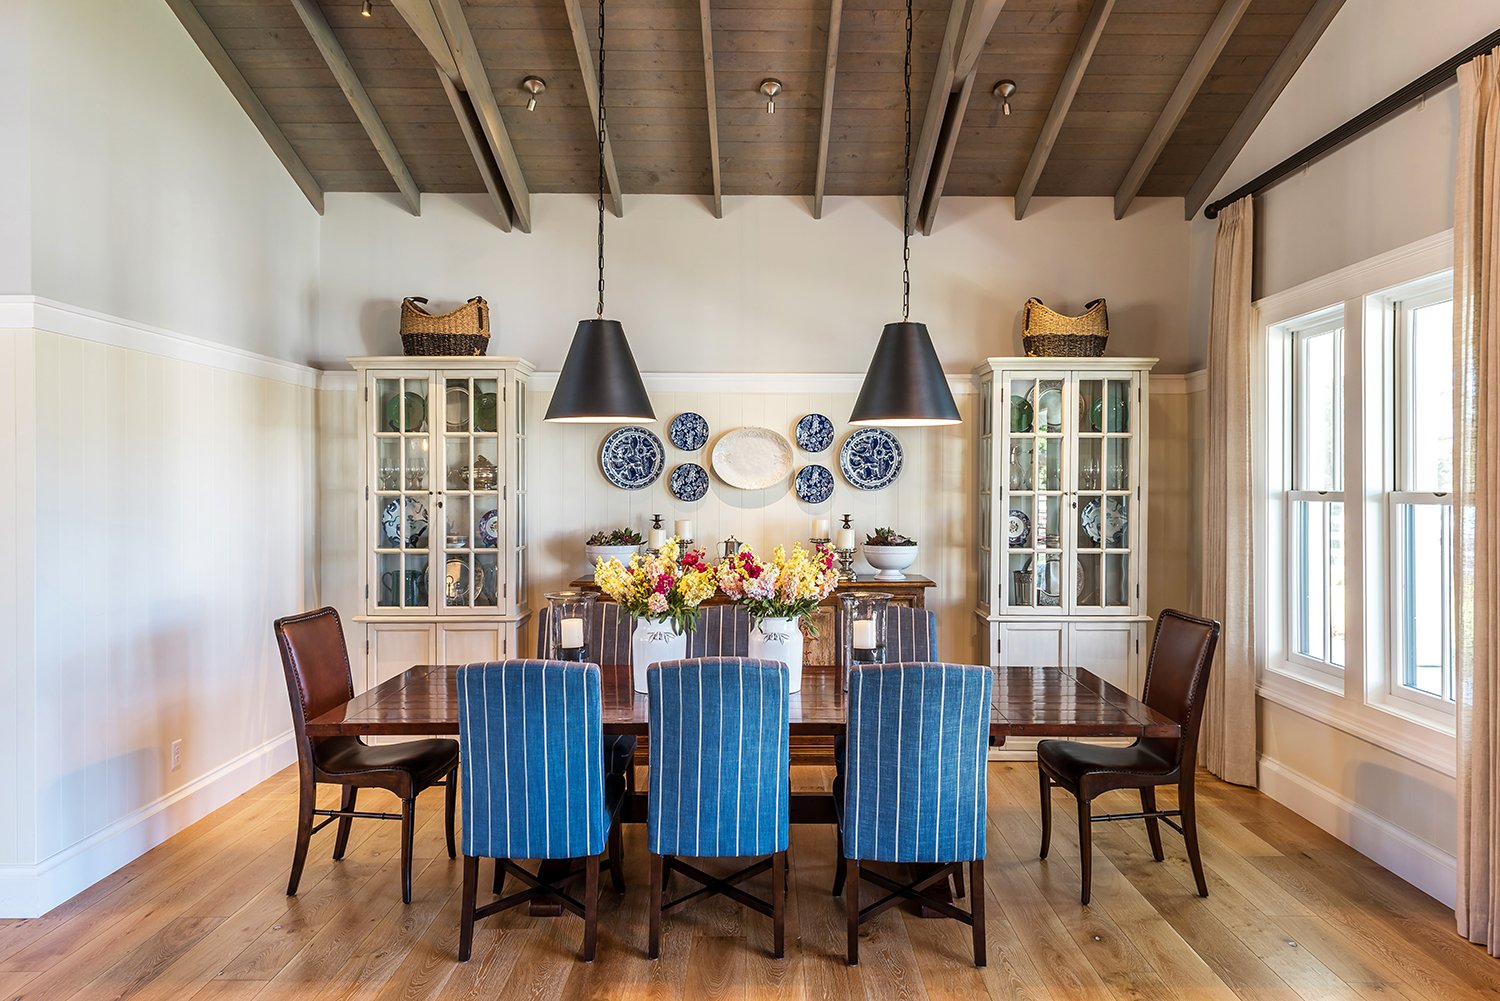  A dining area with black pendant lights, a dining table, and blue upholstered dining chairs.  